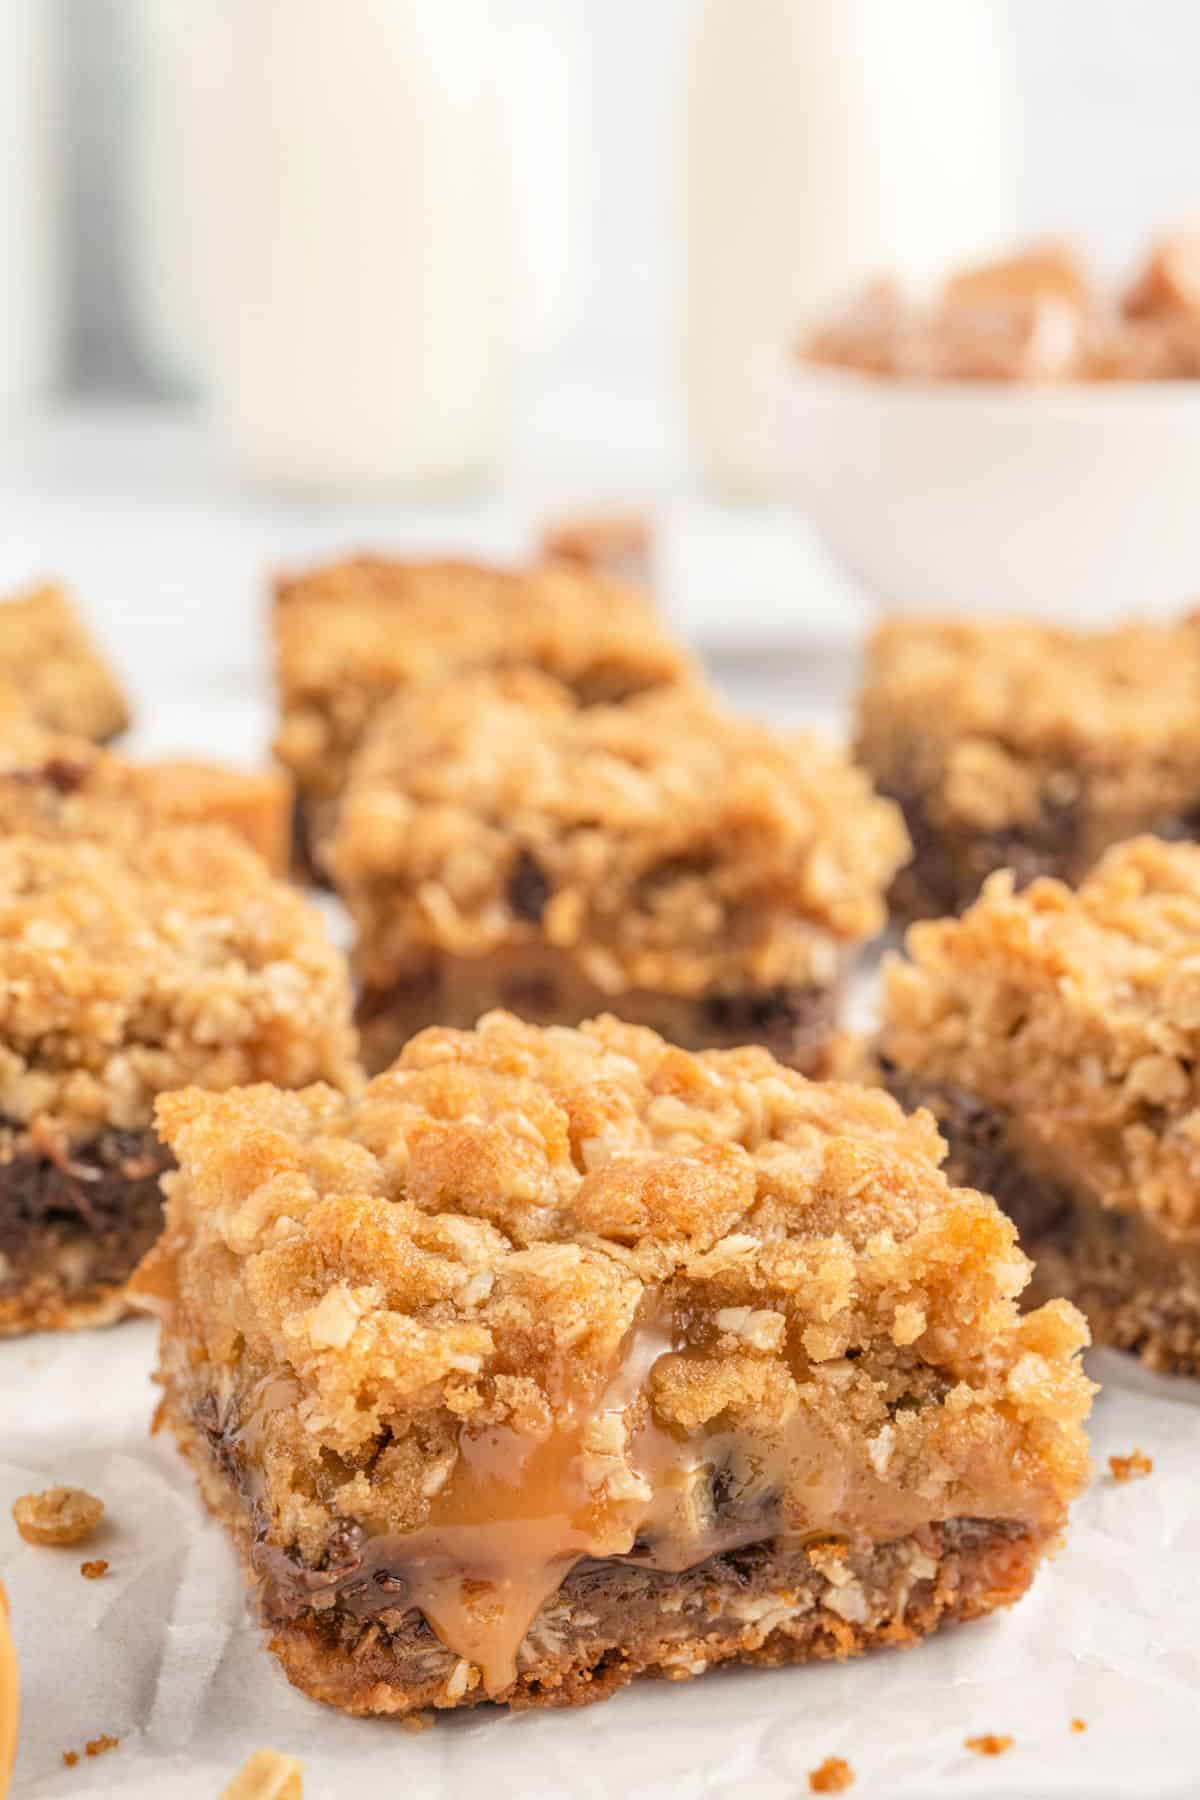 Oatmeal caramel bar with gooey filling dripping.